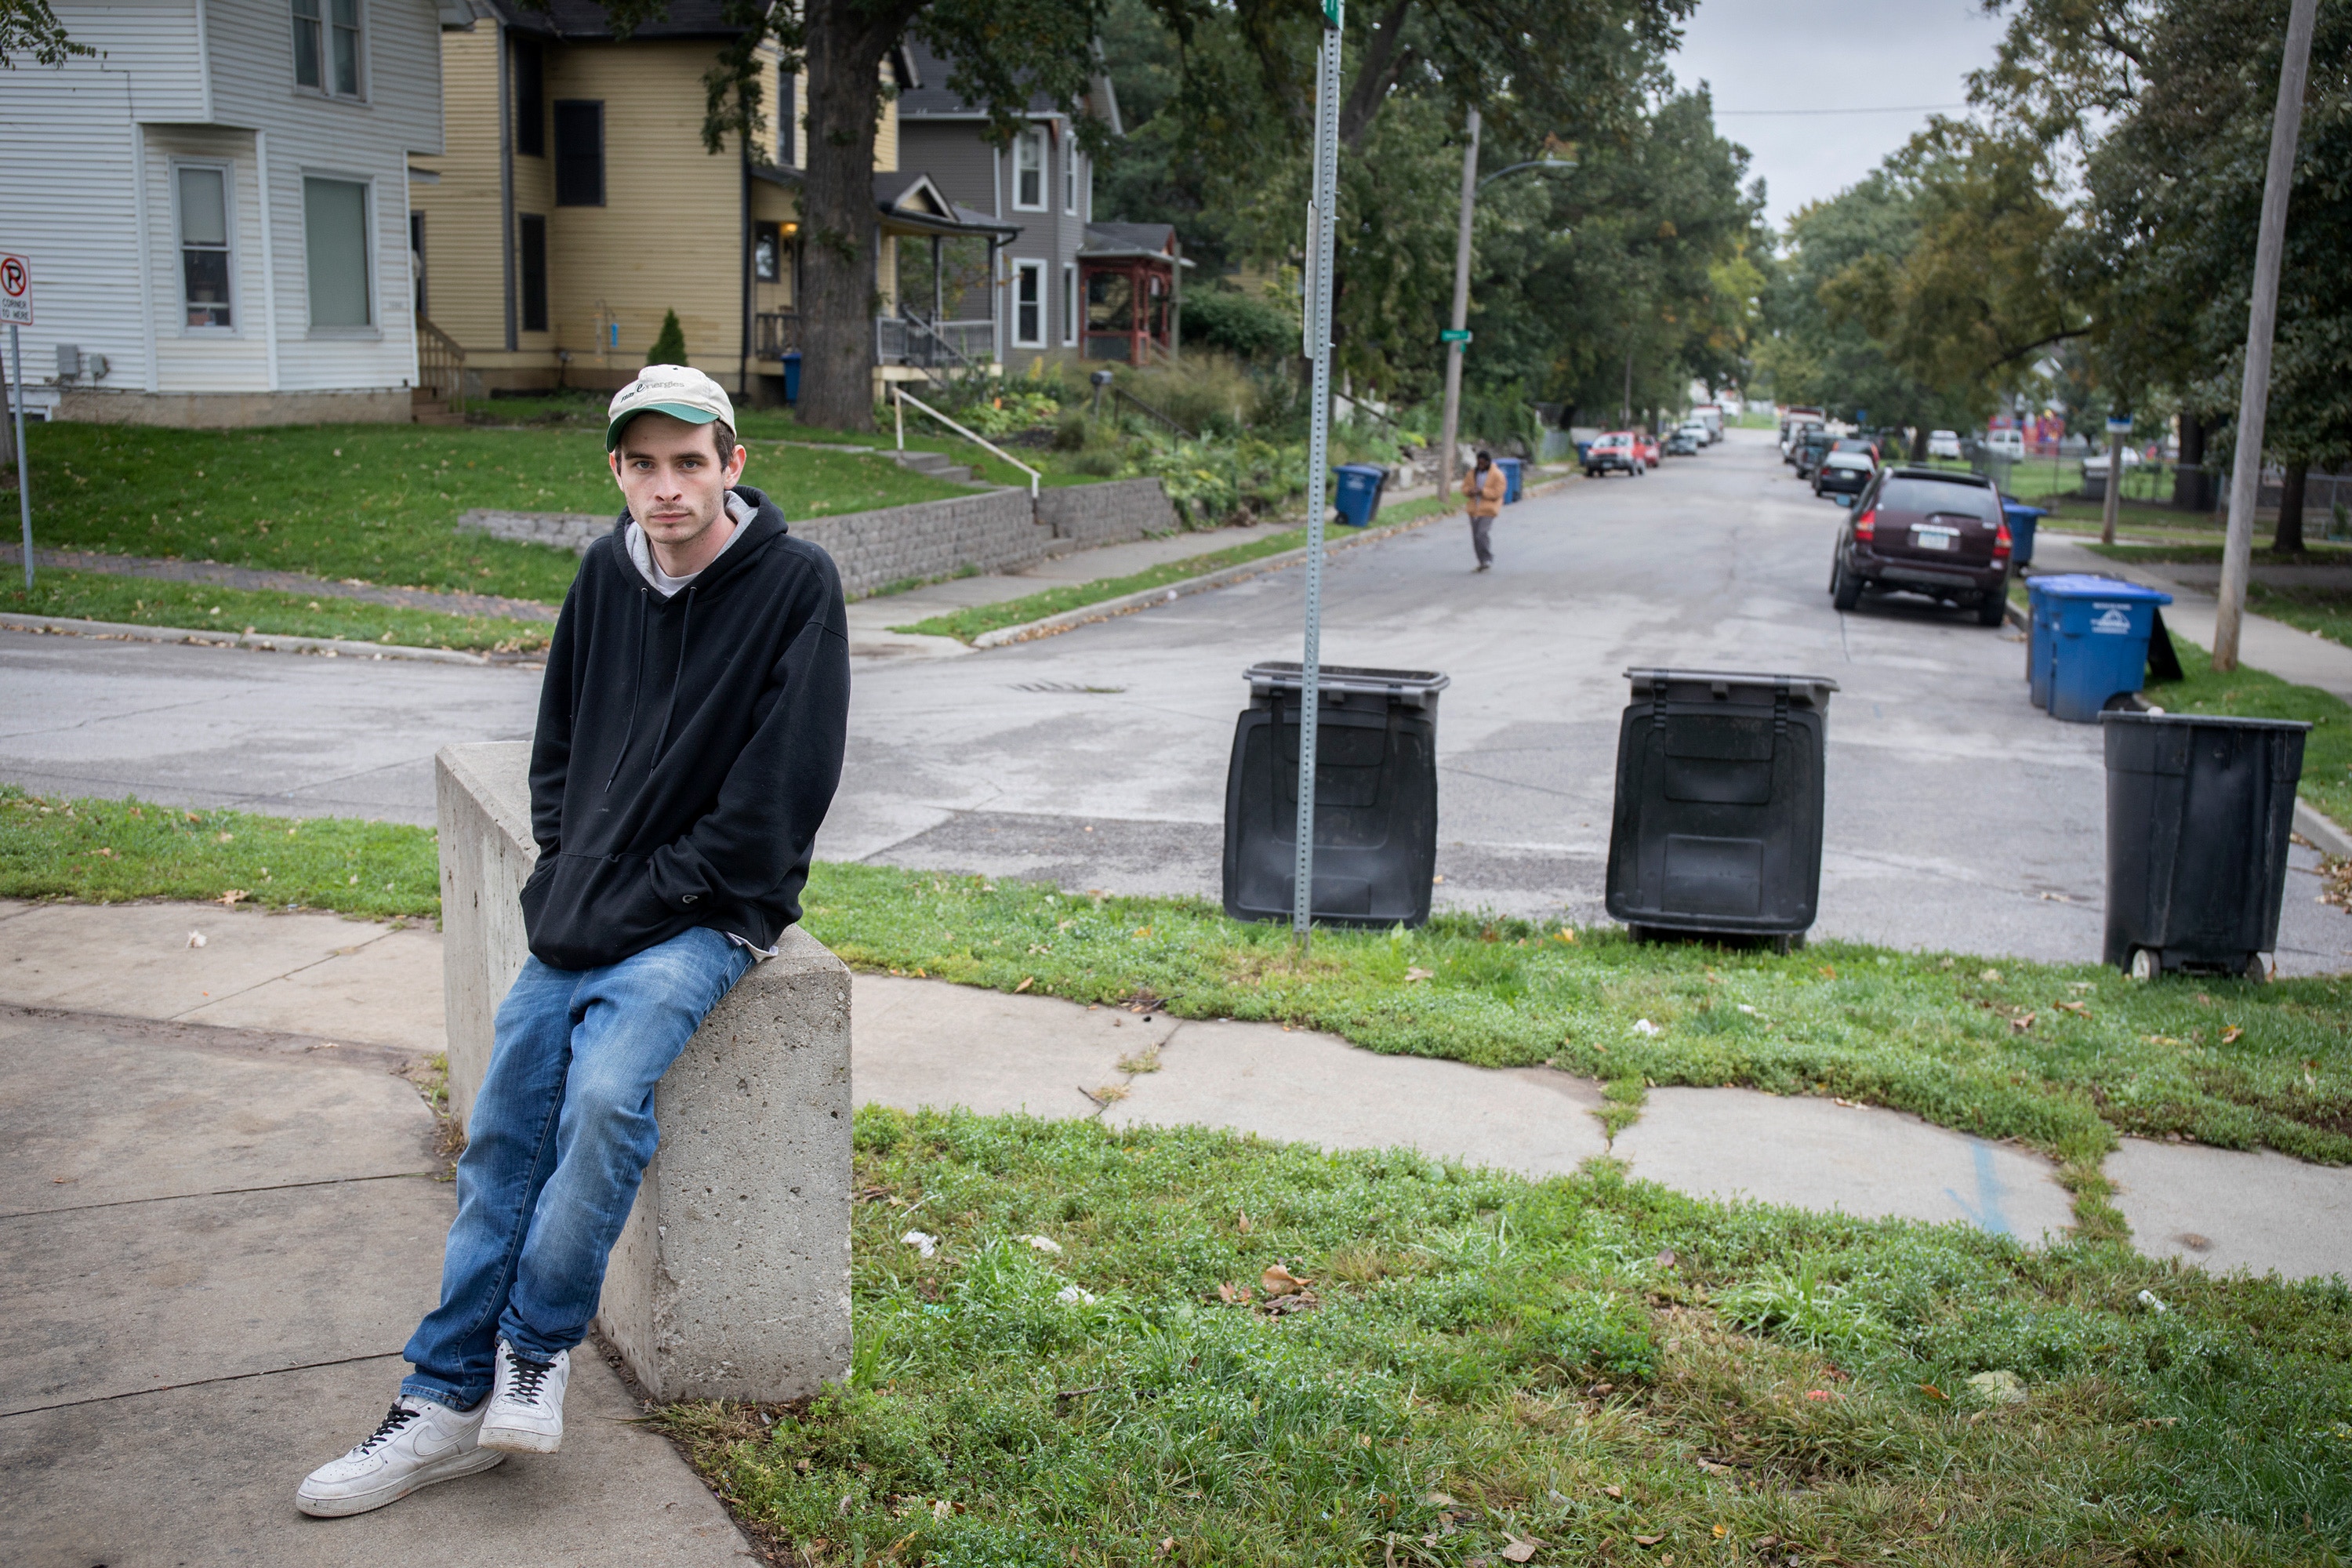 Jesse Horne stands in front of a house occupied by Catholic Workers on Oct. 5, 2018, in Des Moines, Iowa. He lived there but was kicked out of after being accused of being an infiltrator of the anti-Dakota Access pipeline movement. After being thrown out, Jess was homeless and often walked around the neighborhood near downton Des Moines, Iowa. (Rachel Mummey for The Intercept).